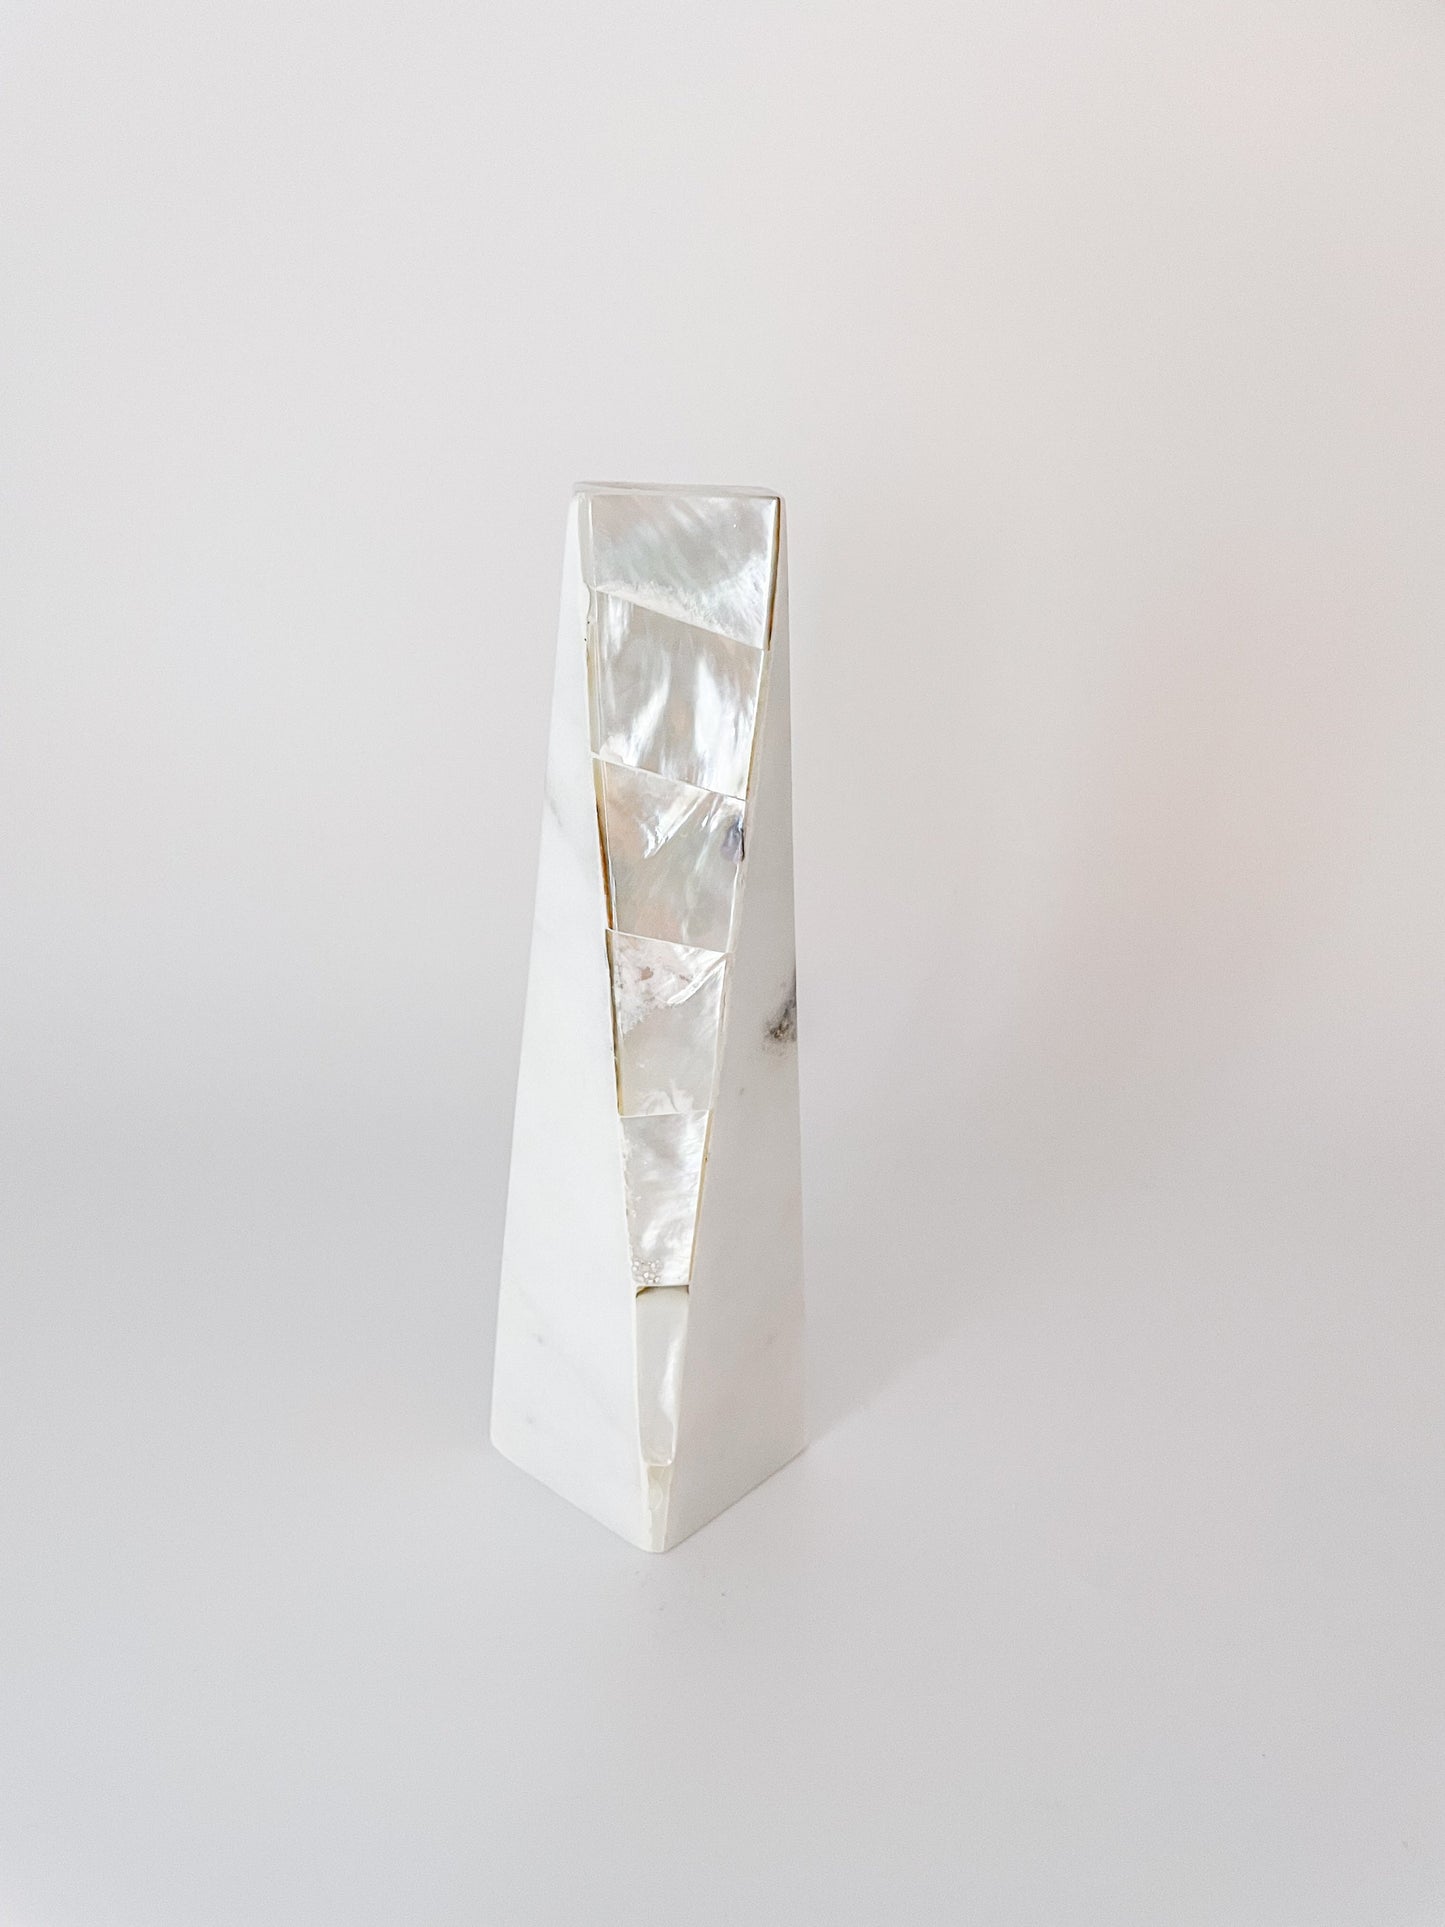 White Marble Mother of Pearl Candle Holders by Anaya